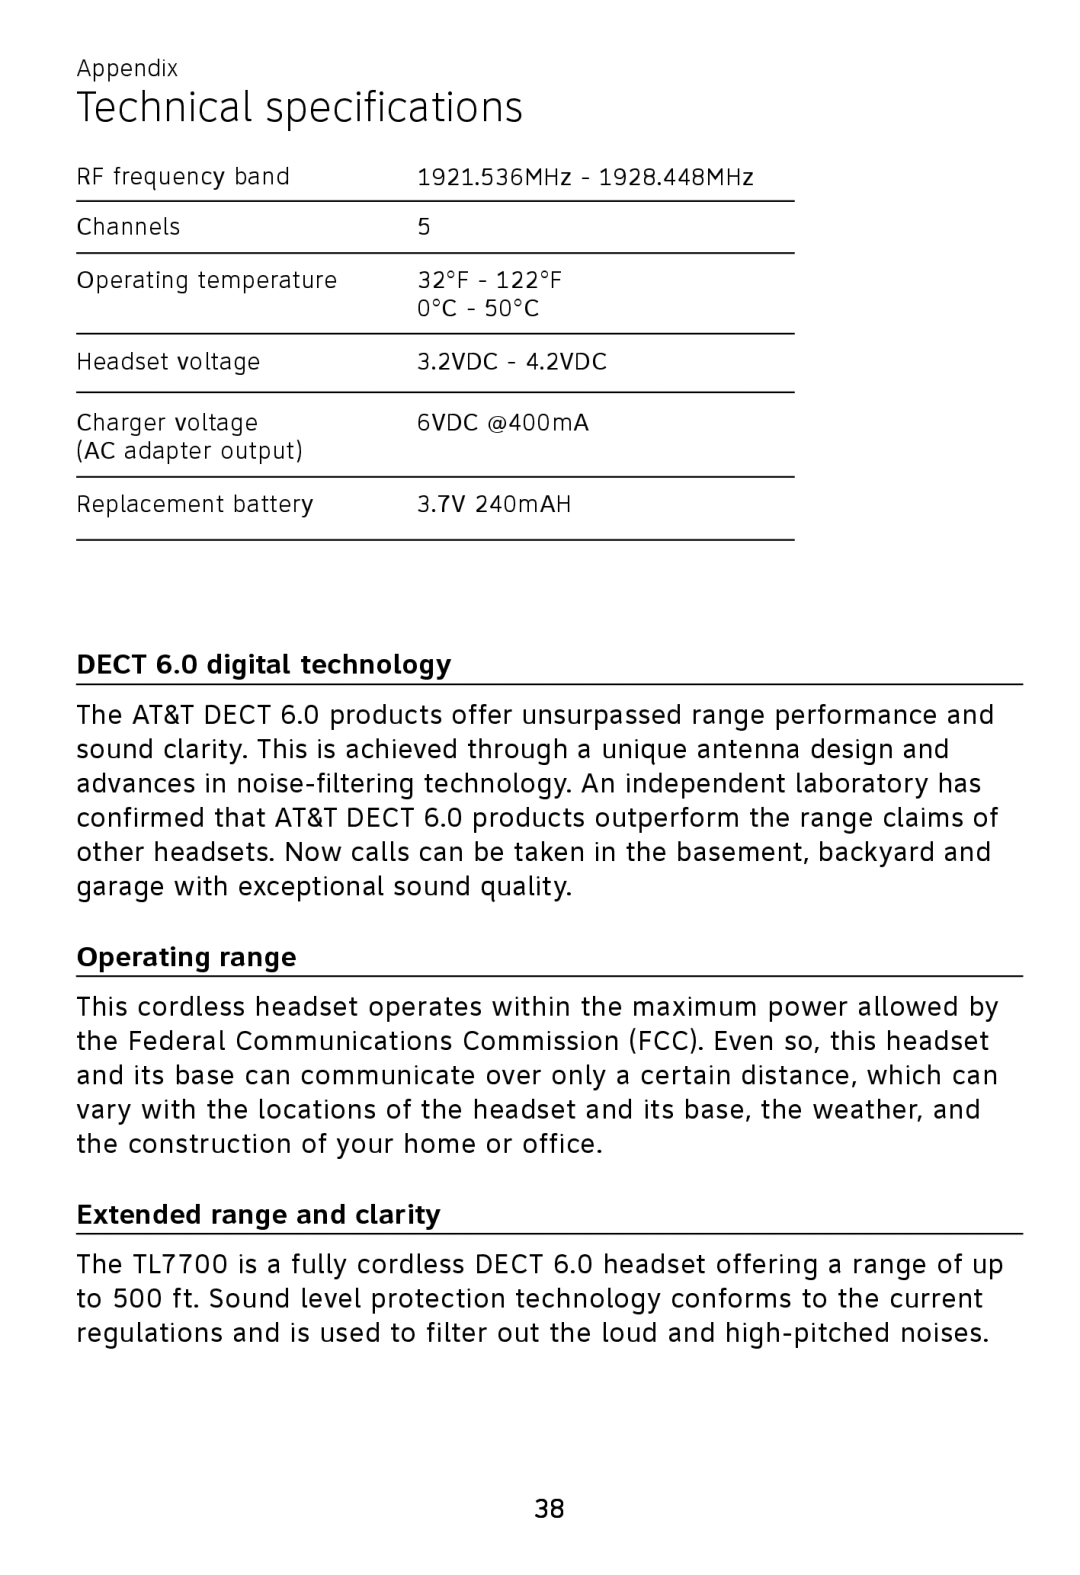 AT&T TL7700 user manual Technical specifications, DECT 6.0 digital technology, Operating range, Extended range and clarity 